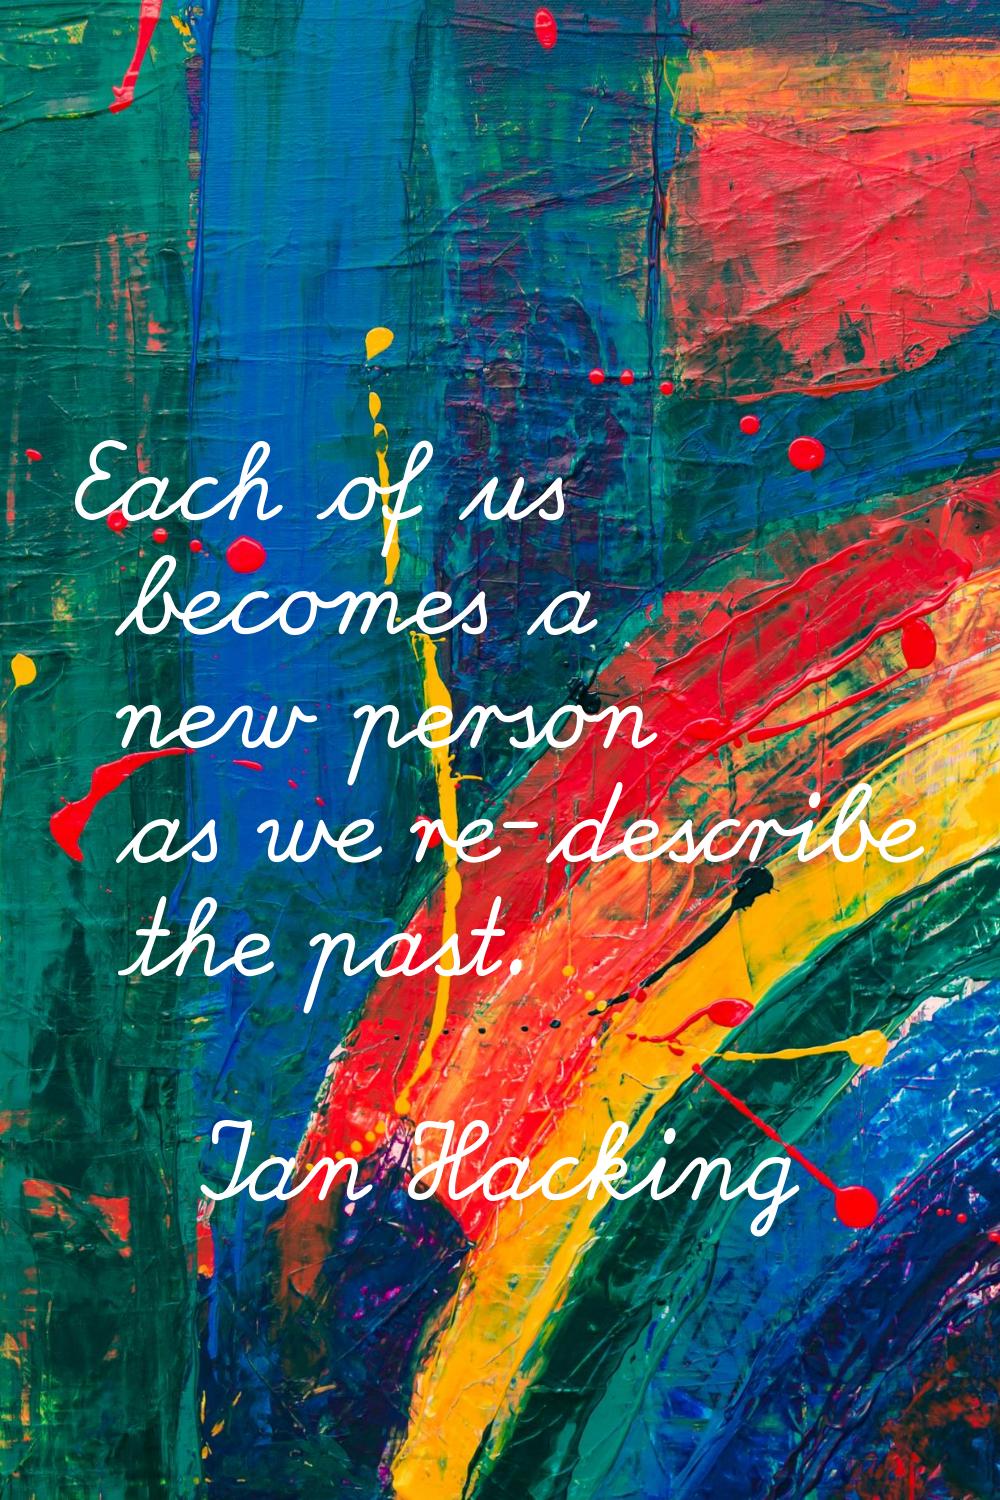 Each of us becomes a new person as we re-describe the past.